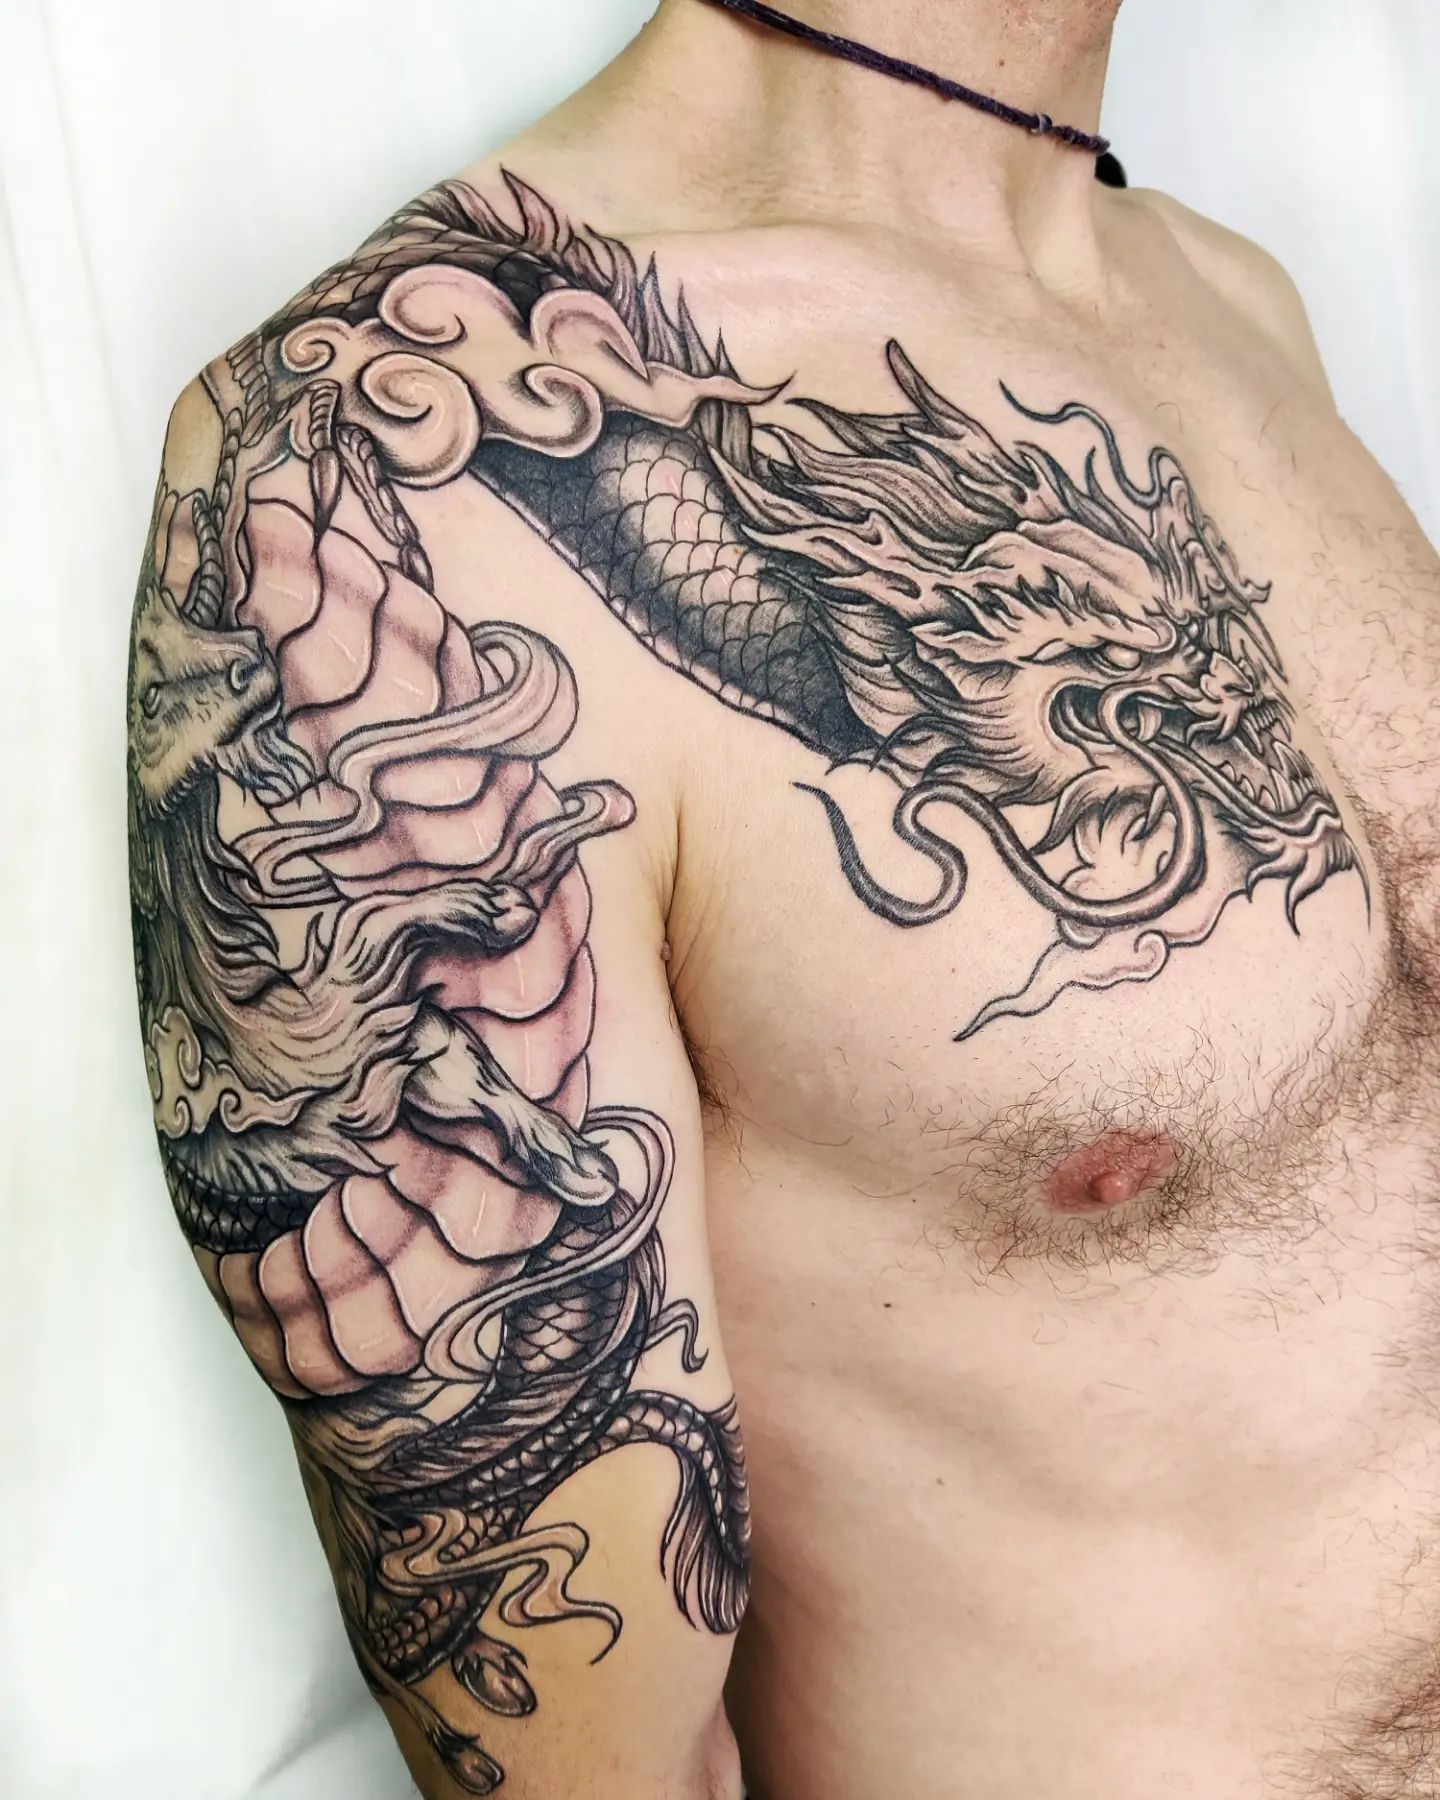 Show your persistency and your dominant bold side with this giant dragon tattoo.